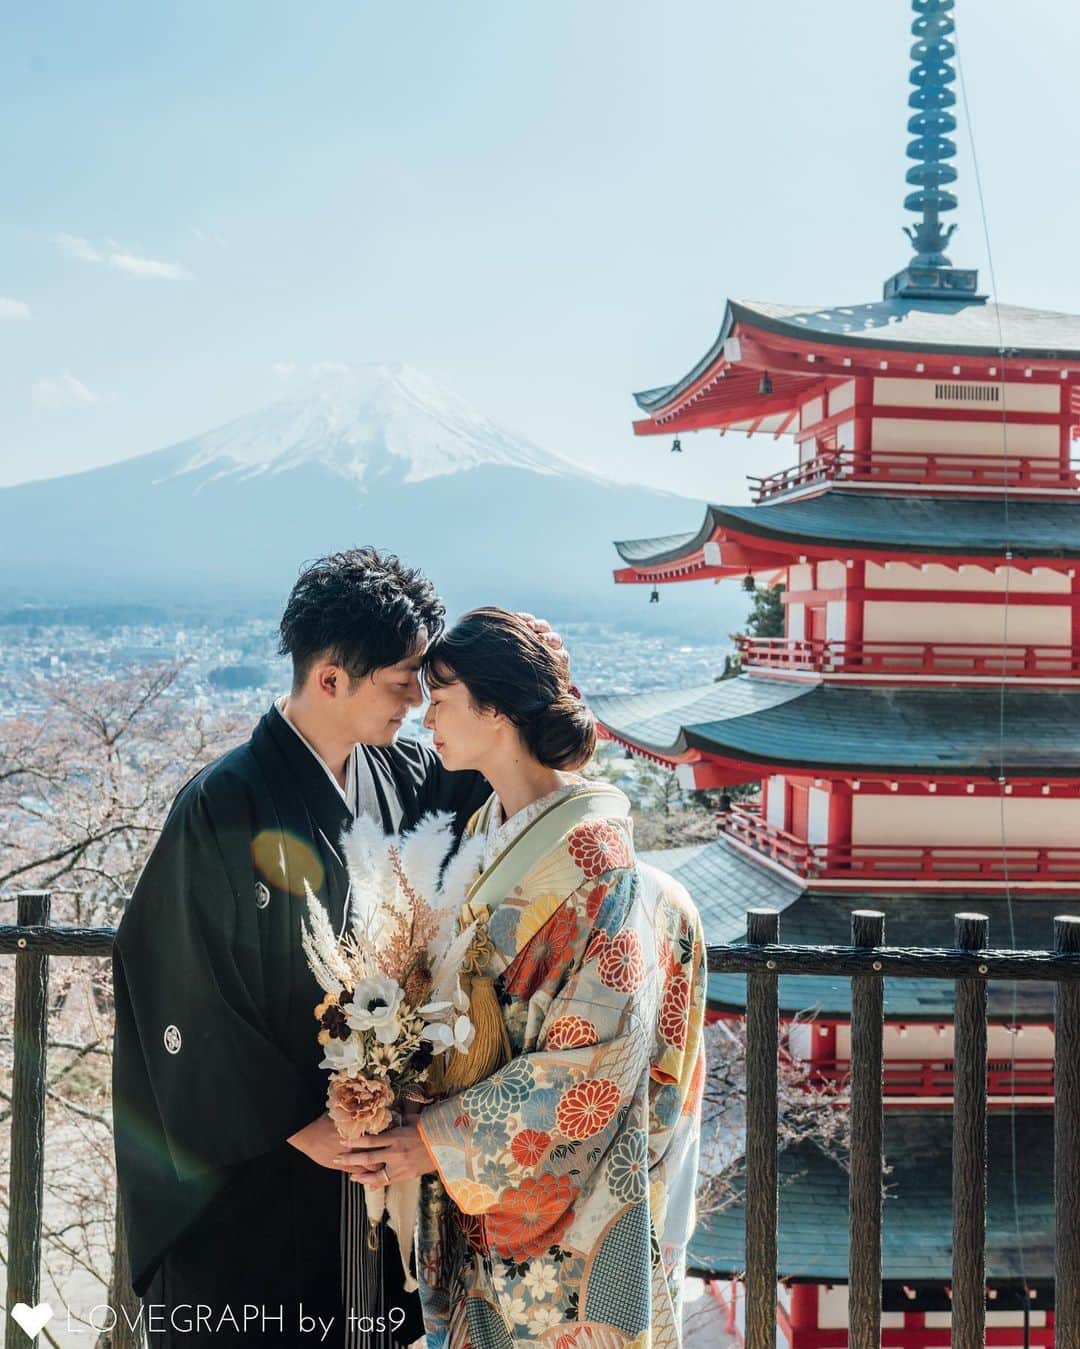 Lovegraph［ラブグラフ］さんのインスタグラム写真 - (Lovegraph［ラブグラフ］Instagram)「Our photography service for foreign tourists is called "Capture My Japan".  ㅤㅤㅤㅤㅤㅤ Follow Us☺️👇🇯🇵 @capturemyjapan  ㅤㅤㅤㅤㅤㅤㅤㅤㅤ  --- ㅤㅤㅤㅤㅤㅤ Capture My Japan is run by Lovegraph, one of the biggest location photoshoot service in Japan. ㅤㅤㅤ We have over 1,000 photographers all over Japan, which makes it possible to shoot anywhere in Japan. ㅤㅤㅤ Since the Japanese border opened last year, many tourists are coming to Japan, ㅤㅤㅤ and it seems like there’s a demand for photographers who speak multiple languages. ㅤㅤㅤ So we stood up and gathered our English-available photographers who can shoot international clients. ㅤㅤㅤㅤㅤㅤ --- ㅤㅤㅤㅤㅤㅤ #tokyophotographer #도쿄사진작가 #东京摄影师 #東京攝影師 #tokyoportraitphotographer #japanphotographer #日本攝影師 #日本摄影师 #photographerinjapan #情侣照片 #情侶照片 #커플사진 #東京旅拍 #도쿄여행사진」3月28日 20時56分 - lovegraph_me